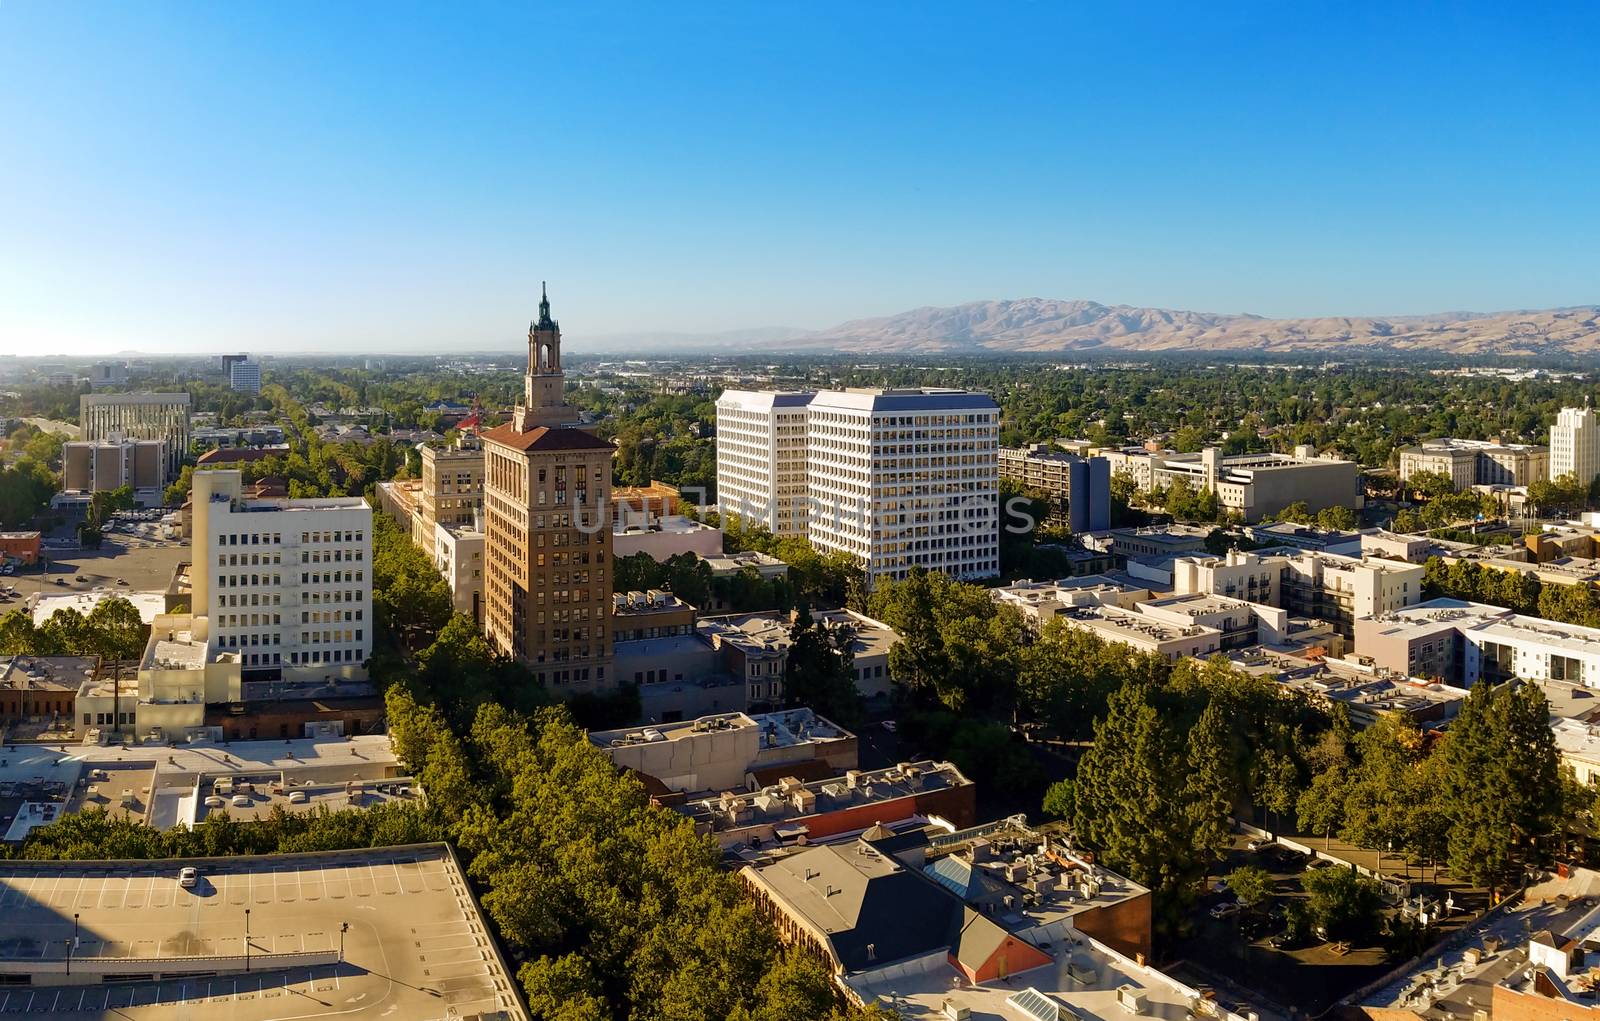 The view on the north part of the downtown of San Jose, California, the capitol of Silicon Valley, high tech center of the world, on a sunny day.